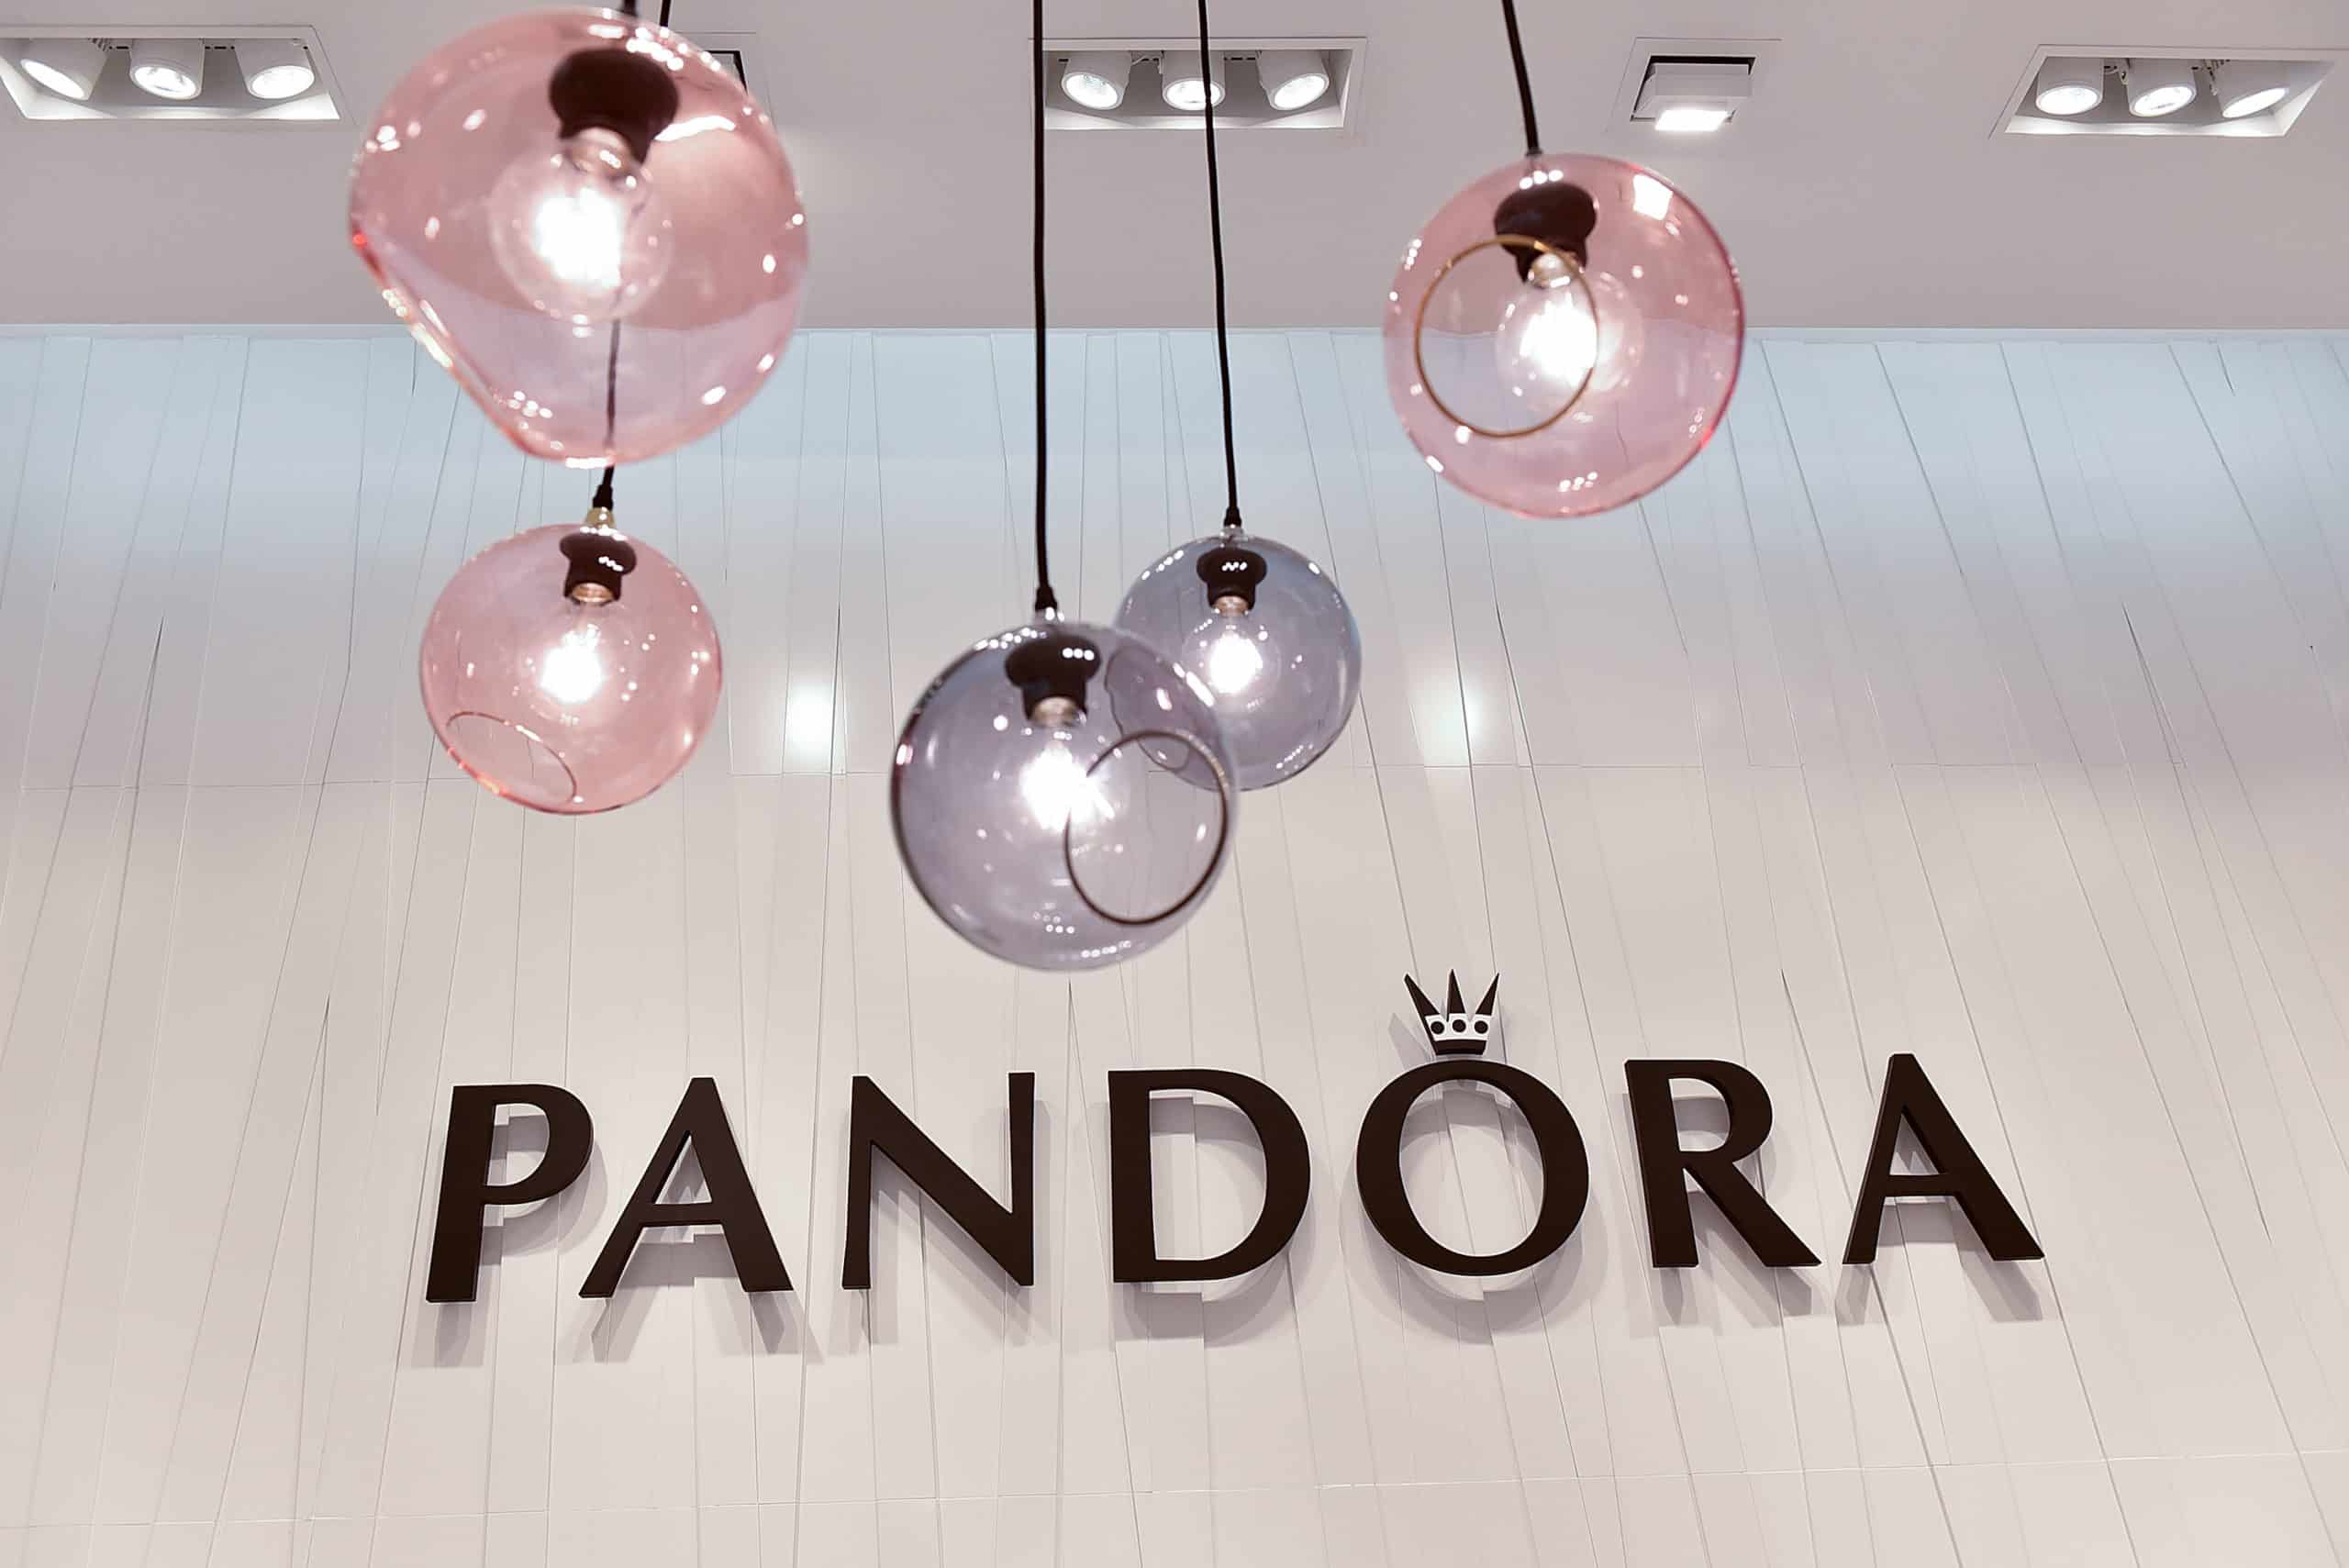 Pandora Makes The Historic Switch From Mined Diamonds To Laboratory-Made Bling